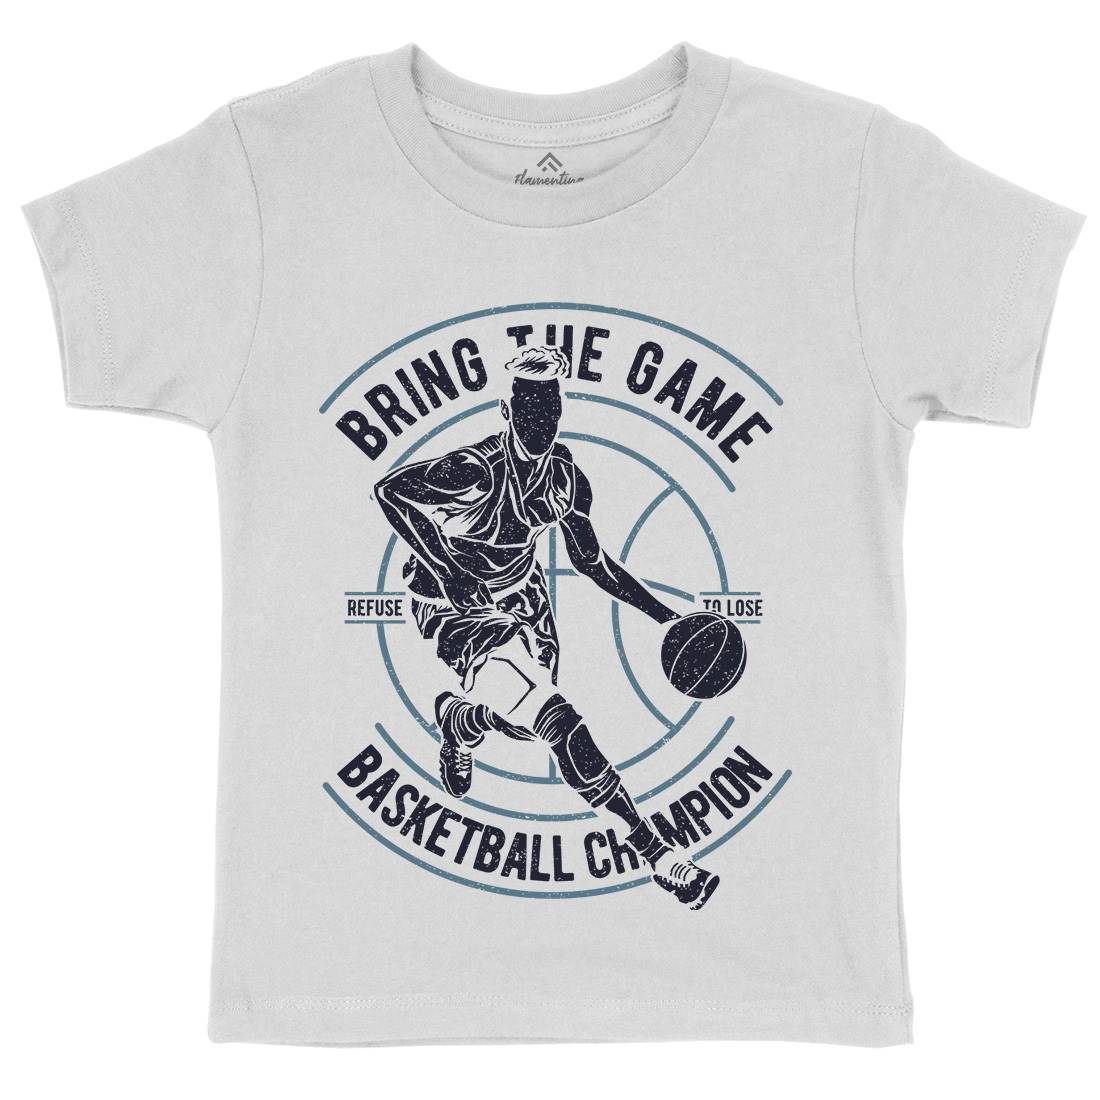 Bring The Game Kids Crew Neck T-Shirt Sport A627